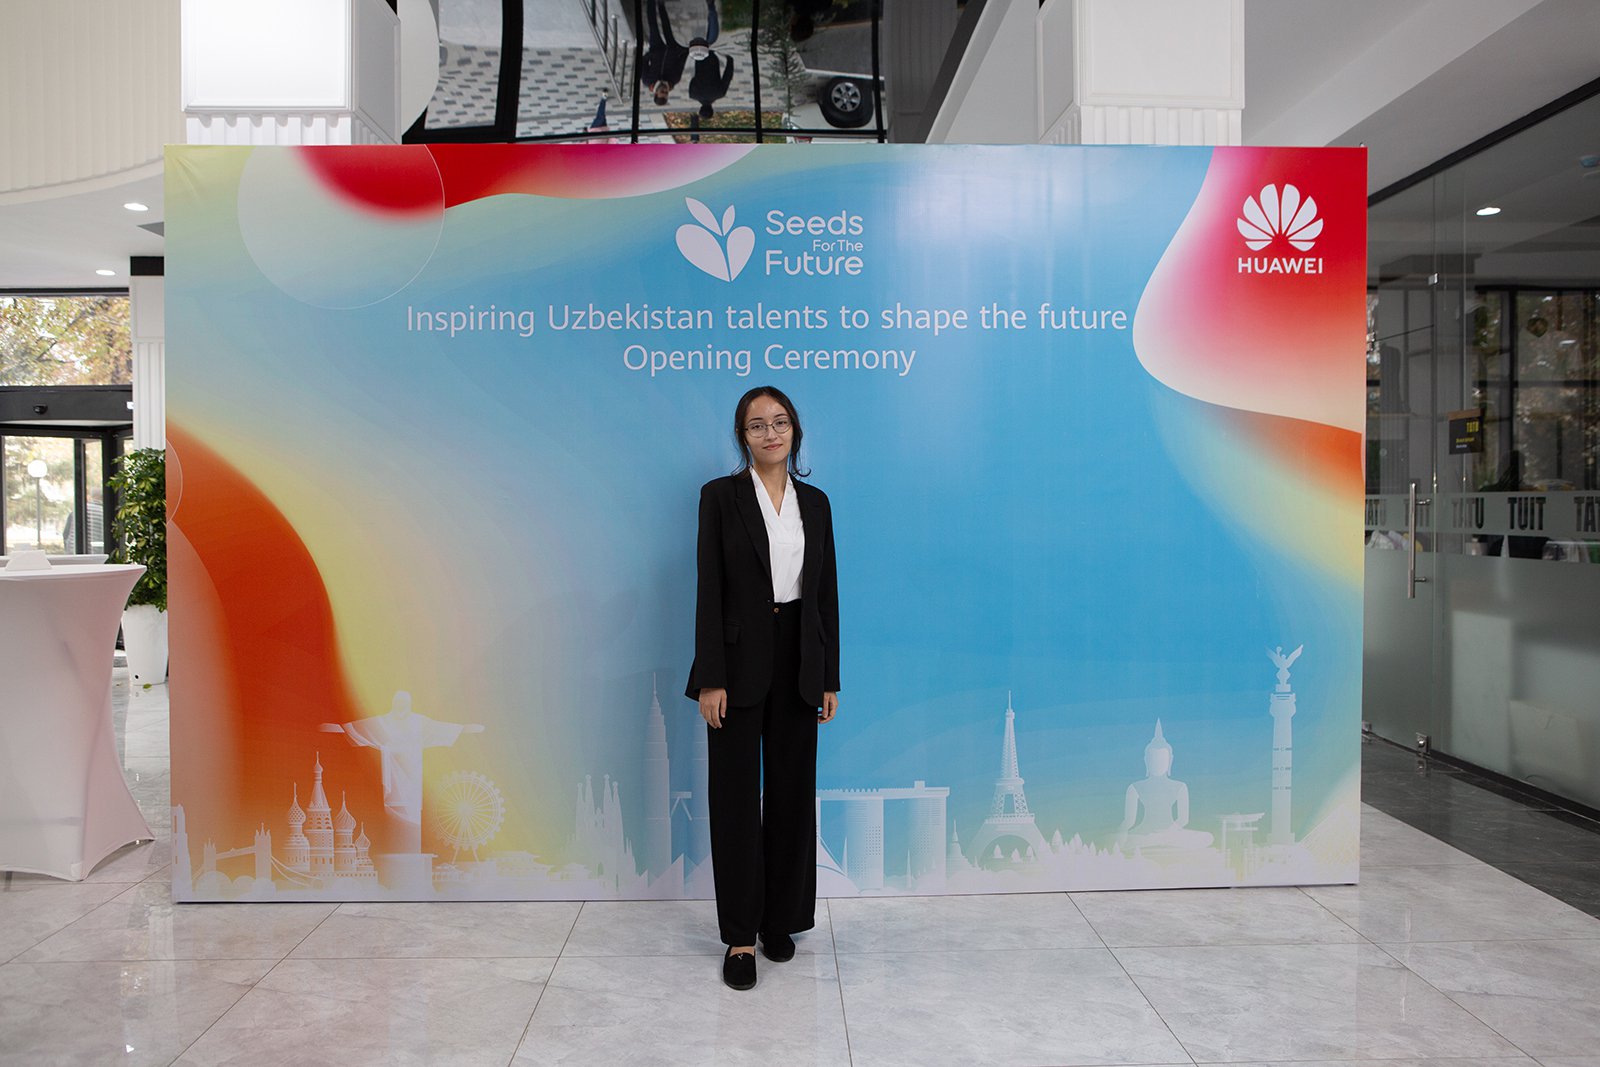 Educational project "Seeds for the Future" by Huawei launched in Uzbekistan for the eighth time.